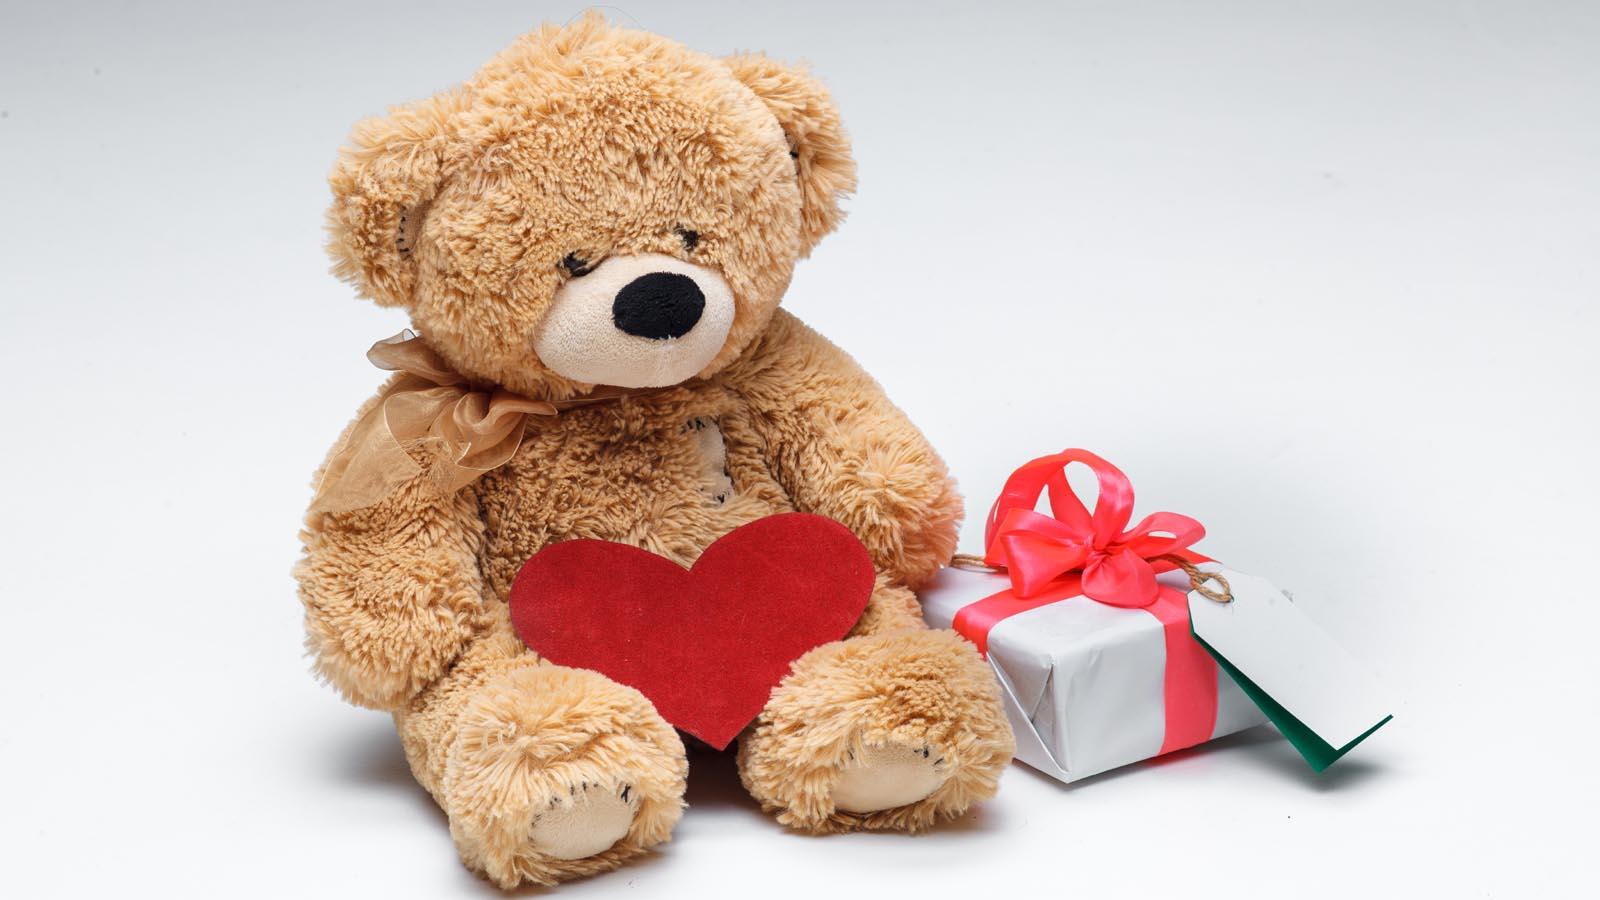 Happy Teddy Day 2023 Messages, Teddy Bear Pics Images